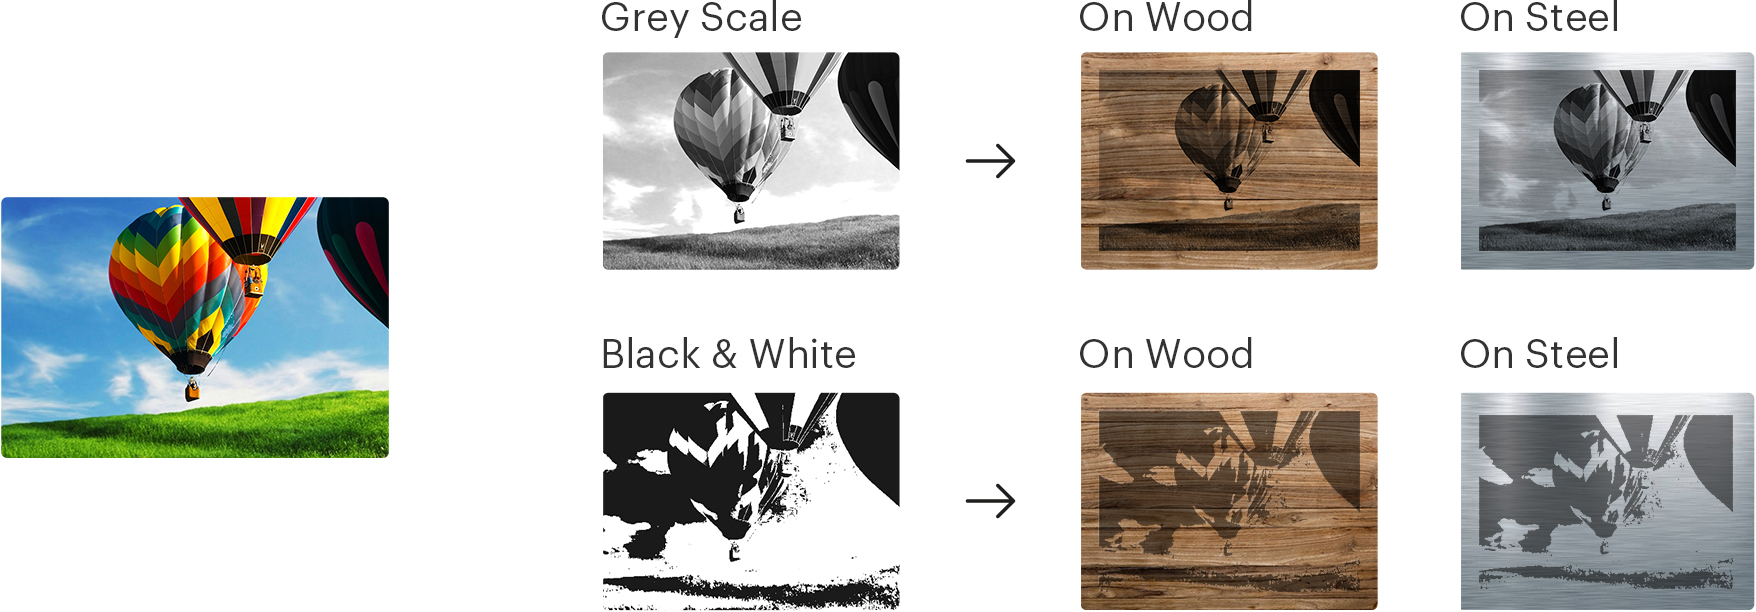 Automatic image conversion to grayscale, single color, black and white